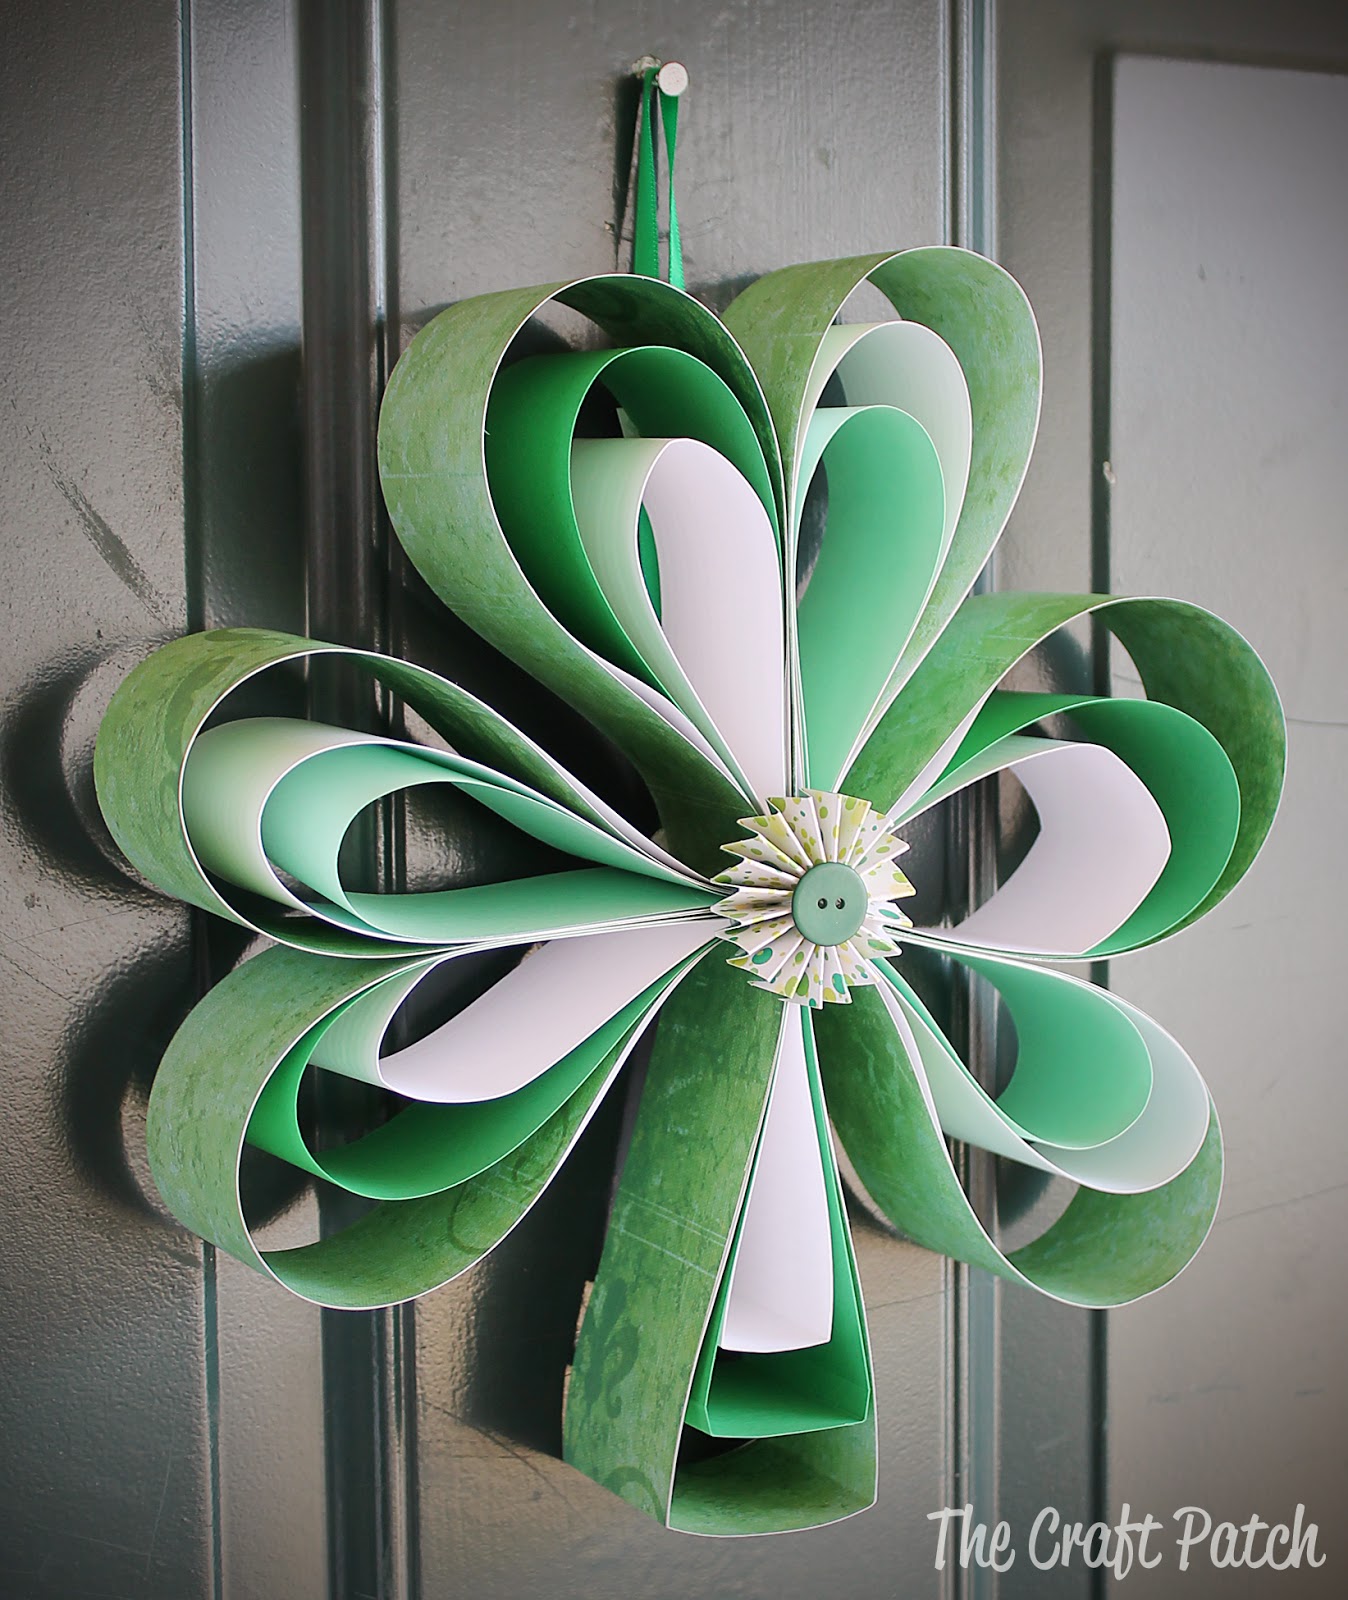 Dress Up Your Home For St. Patrick's Day by Making This Cute Wreath Out of Scrapbook Paper!9